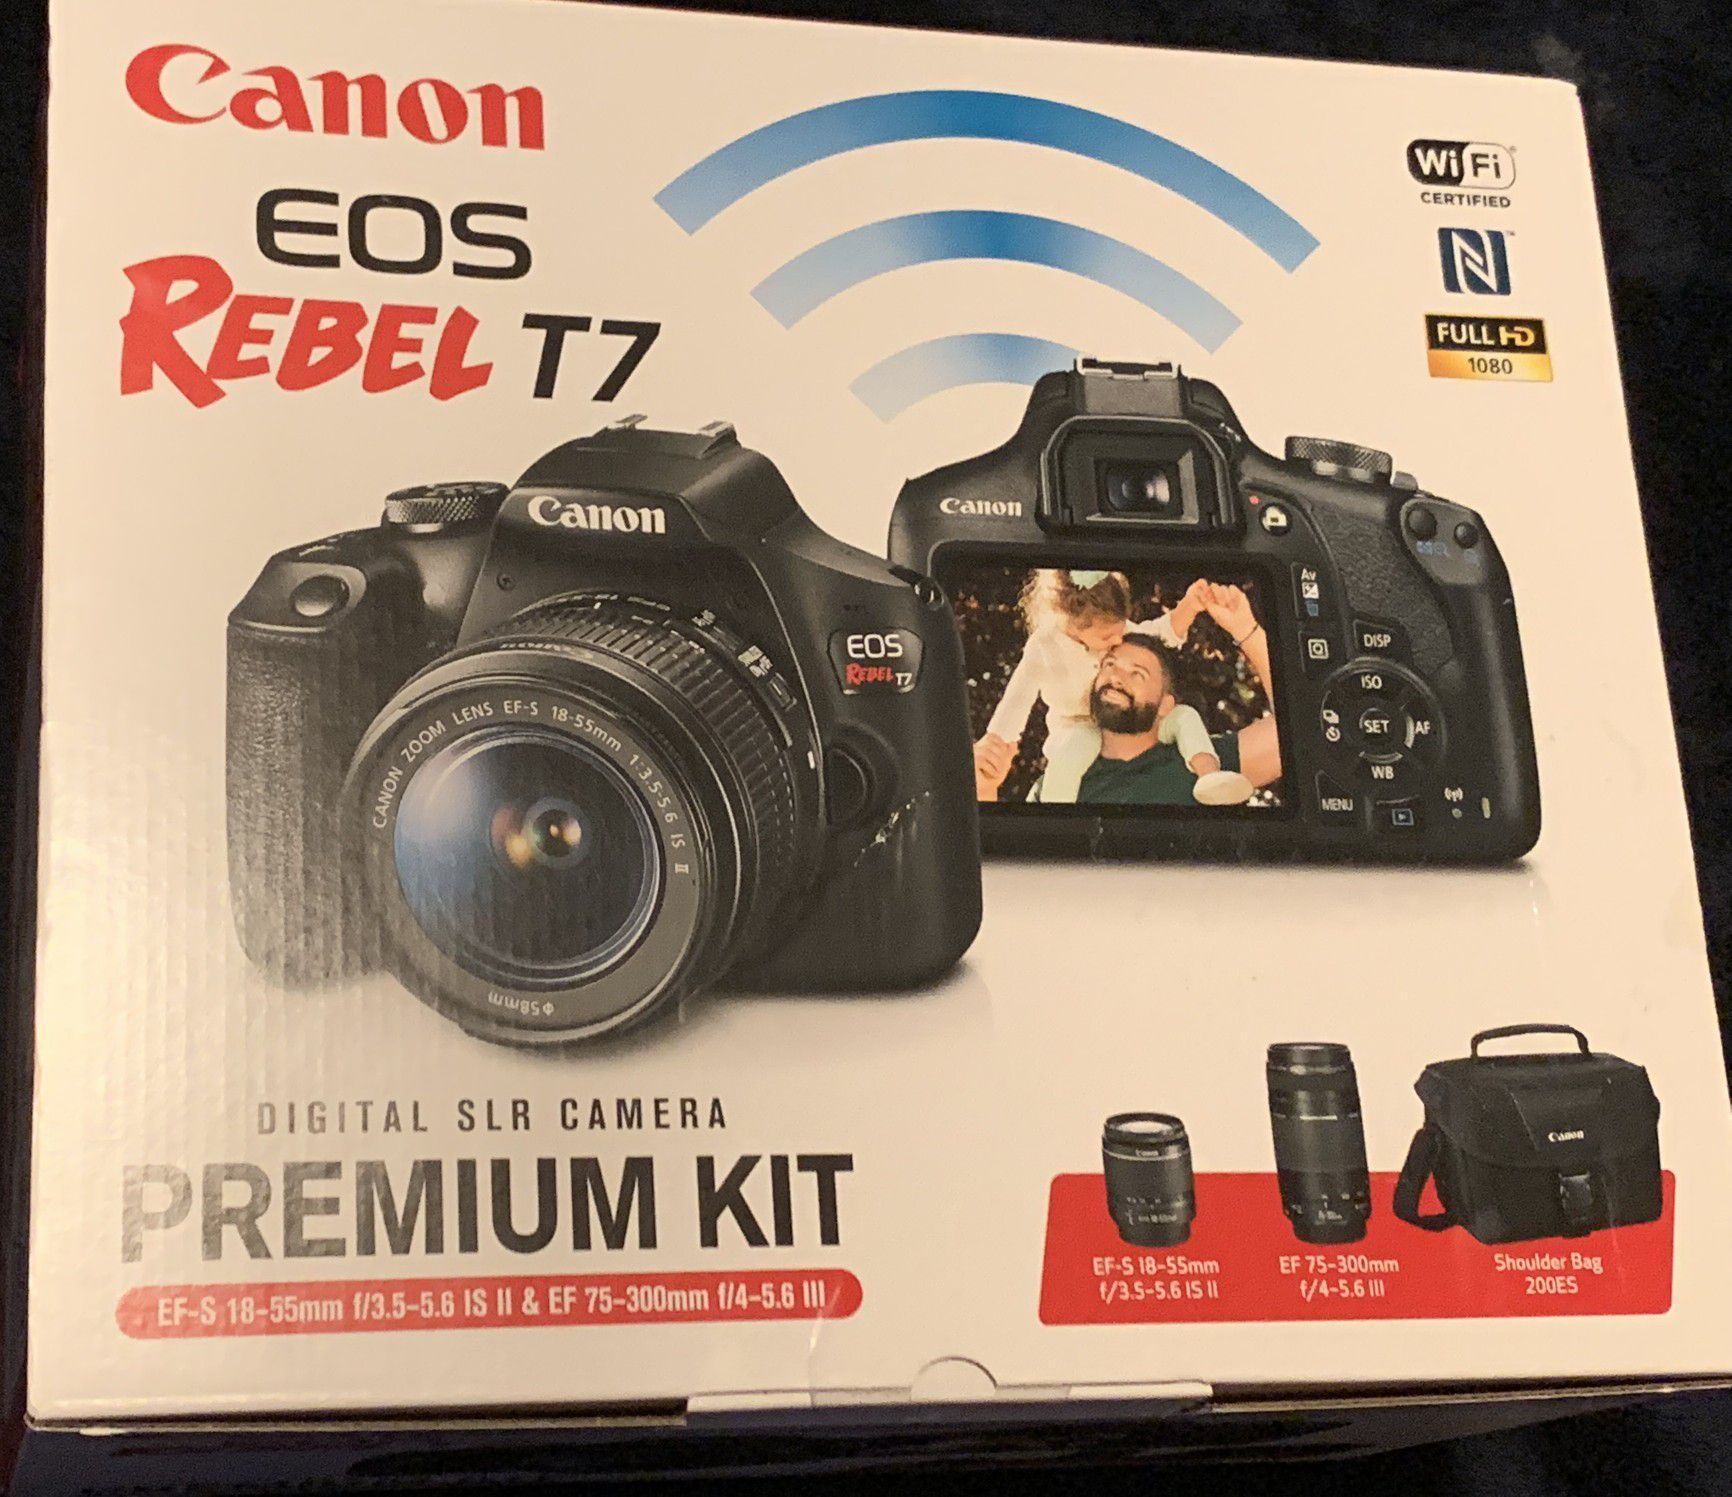 Canon - EOS Rebel T7 DSLR Two Lens Kit with EF-S 18-55mm and EF 75-300mm Lenses & Bag NEW